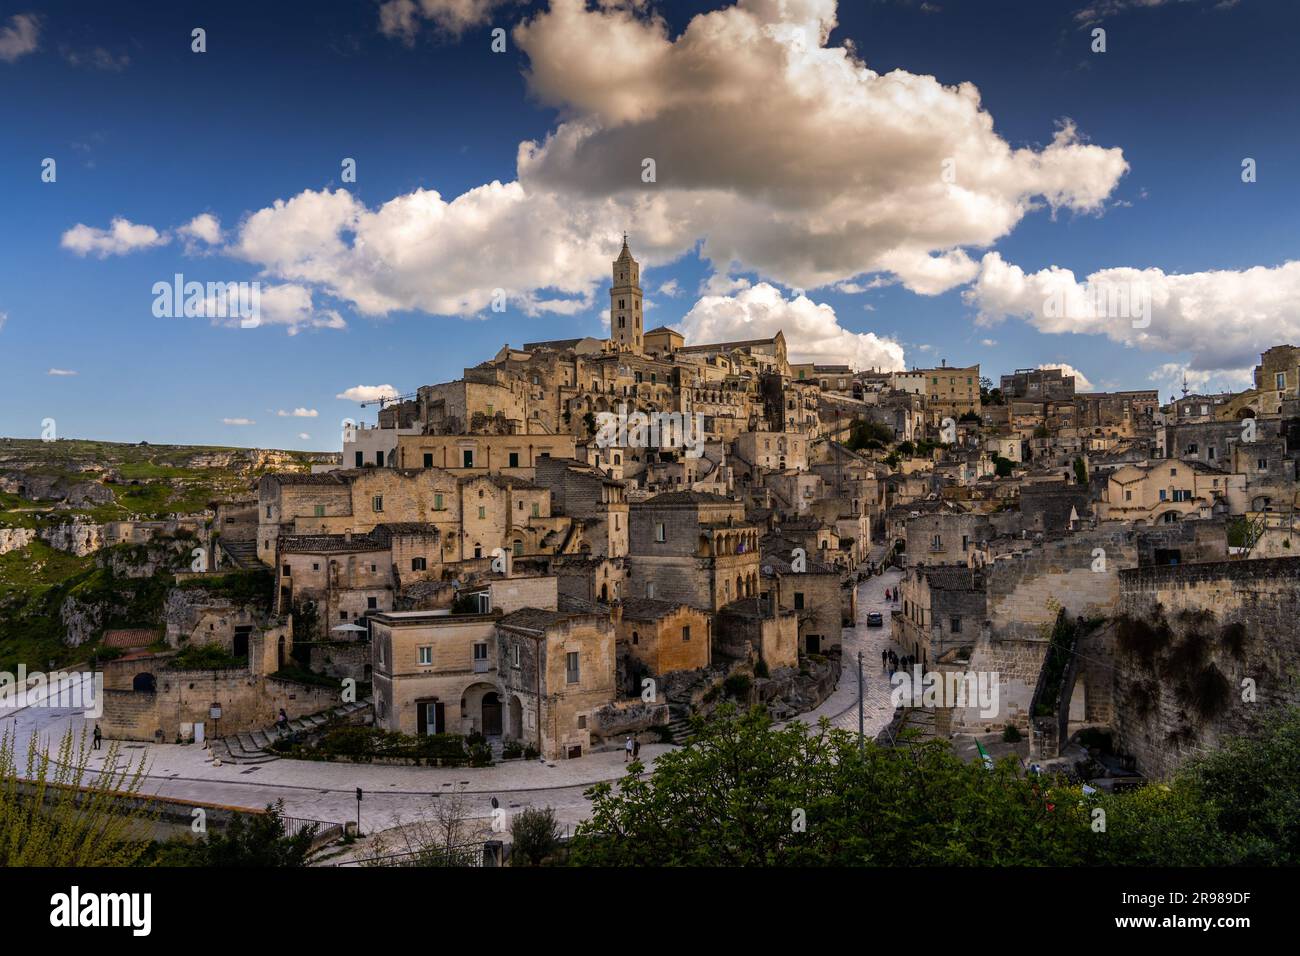 The medieval town of Matera in the  Italian region of Basilicata. It is known for the Sassy, caves excavated on the sides of the hill. Stock Photo